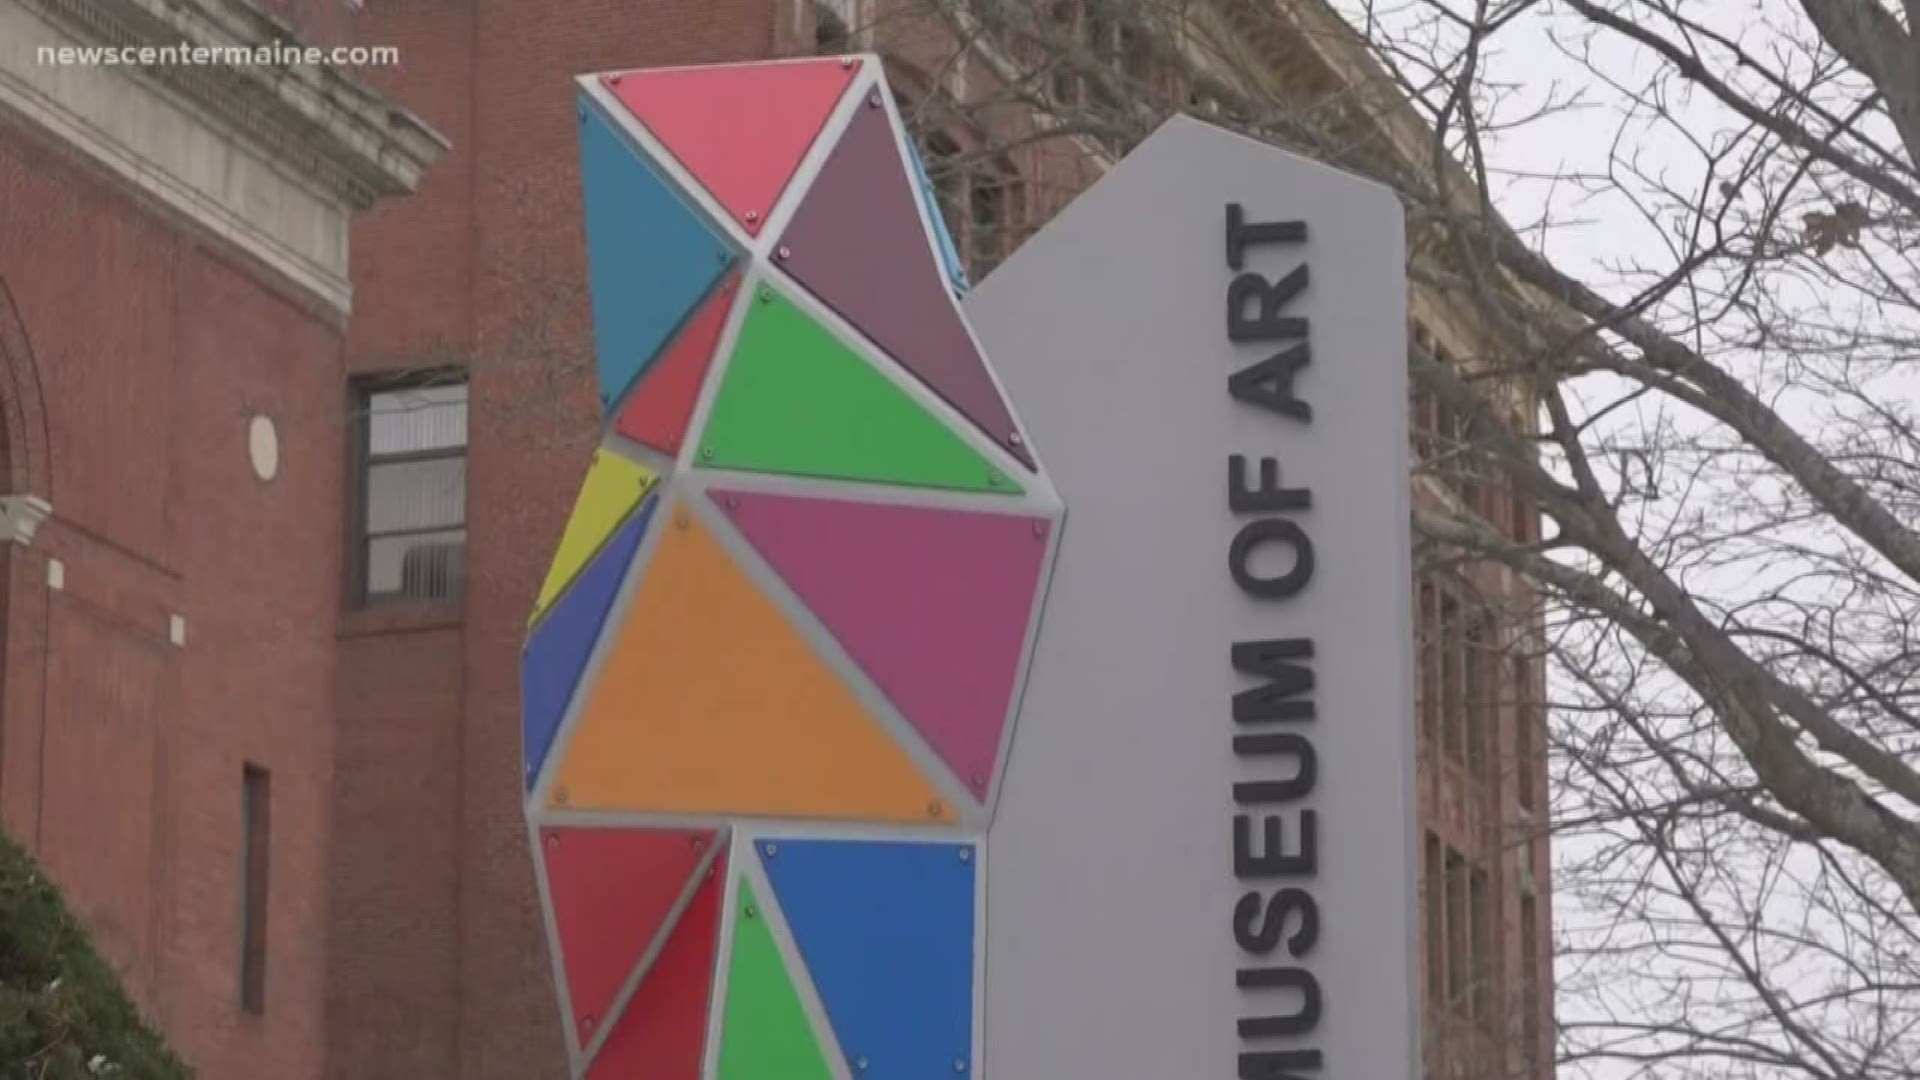 UMaine Museum of Art in Bangor unveiled a new sculpture and sign today